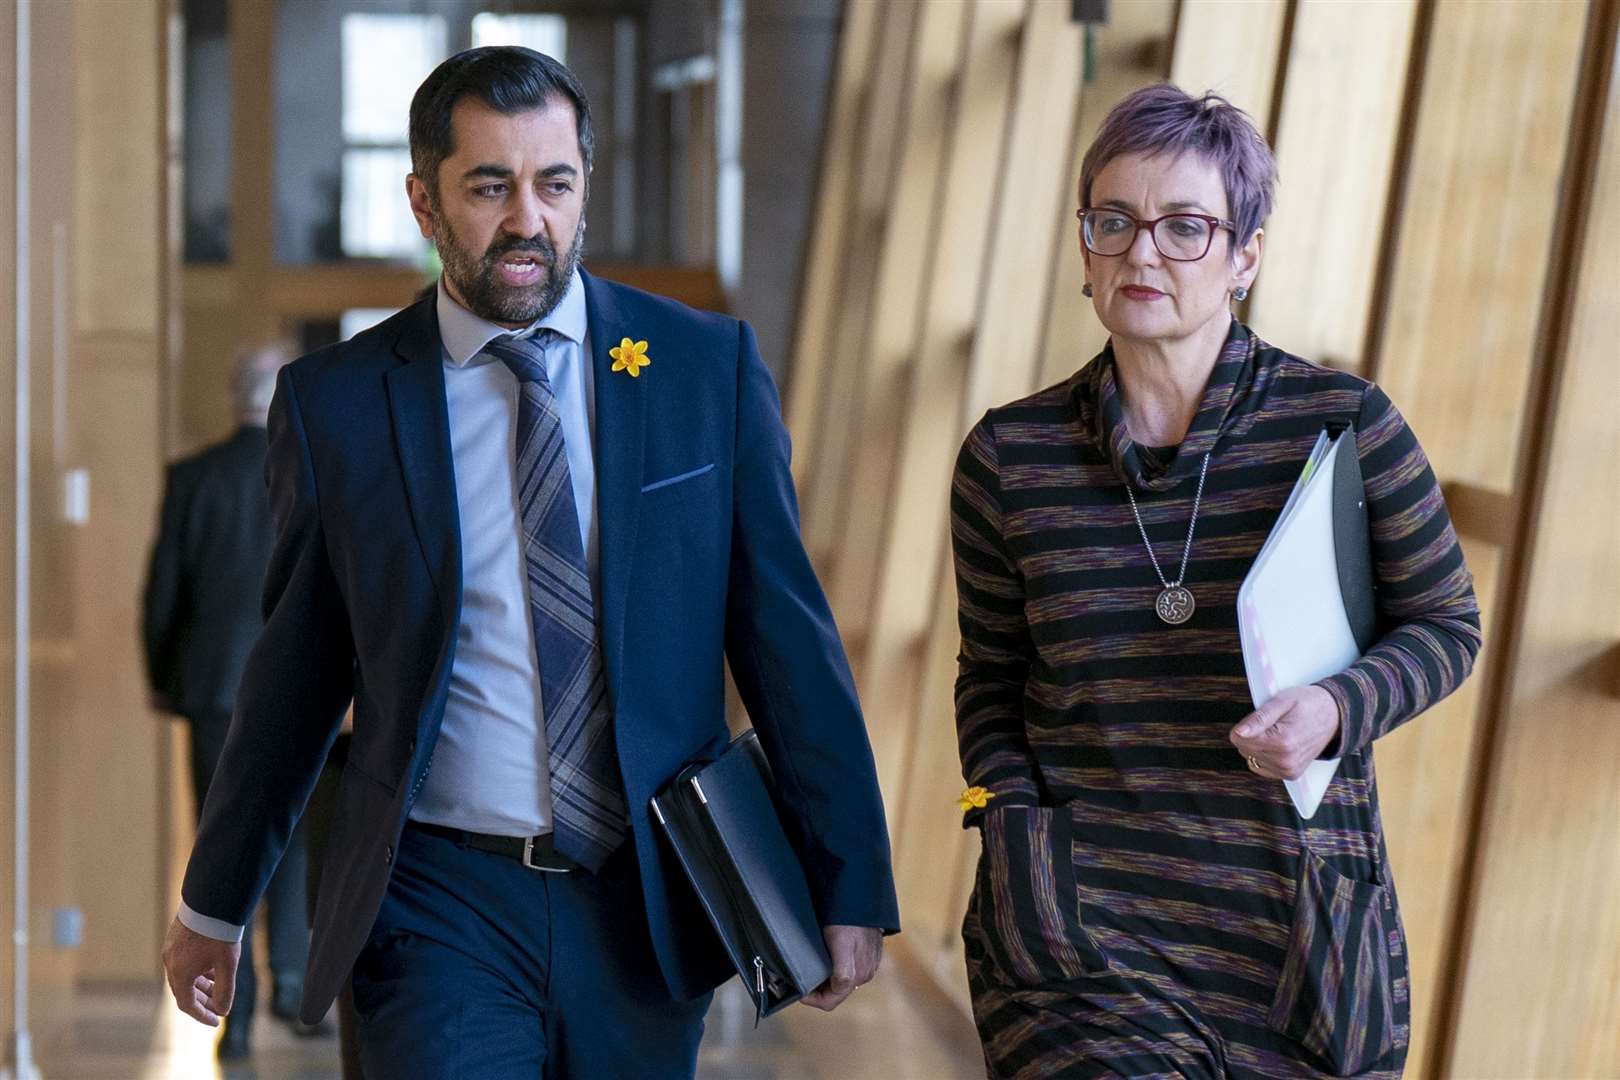 Margaret Caldwell will meet with Humza Yousaf and Angela Constance next week (Jane Barlow/PA)